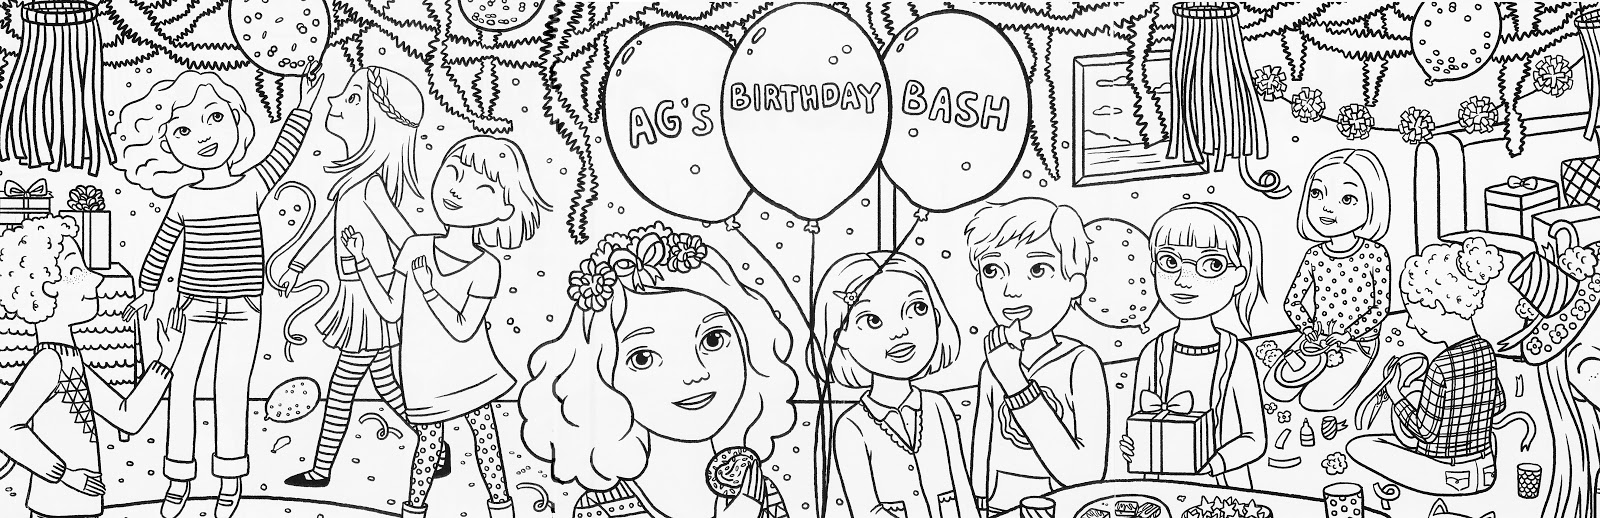 American Girl Magazine Special Birthday Coloring Page